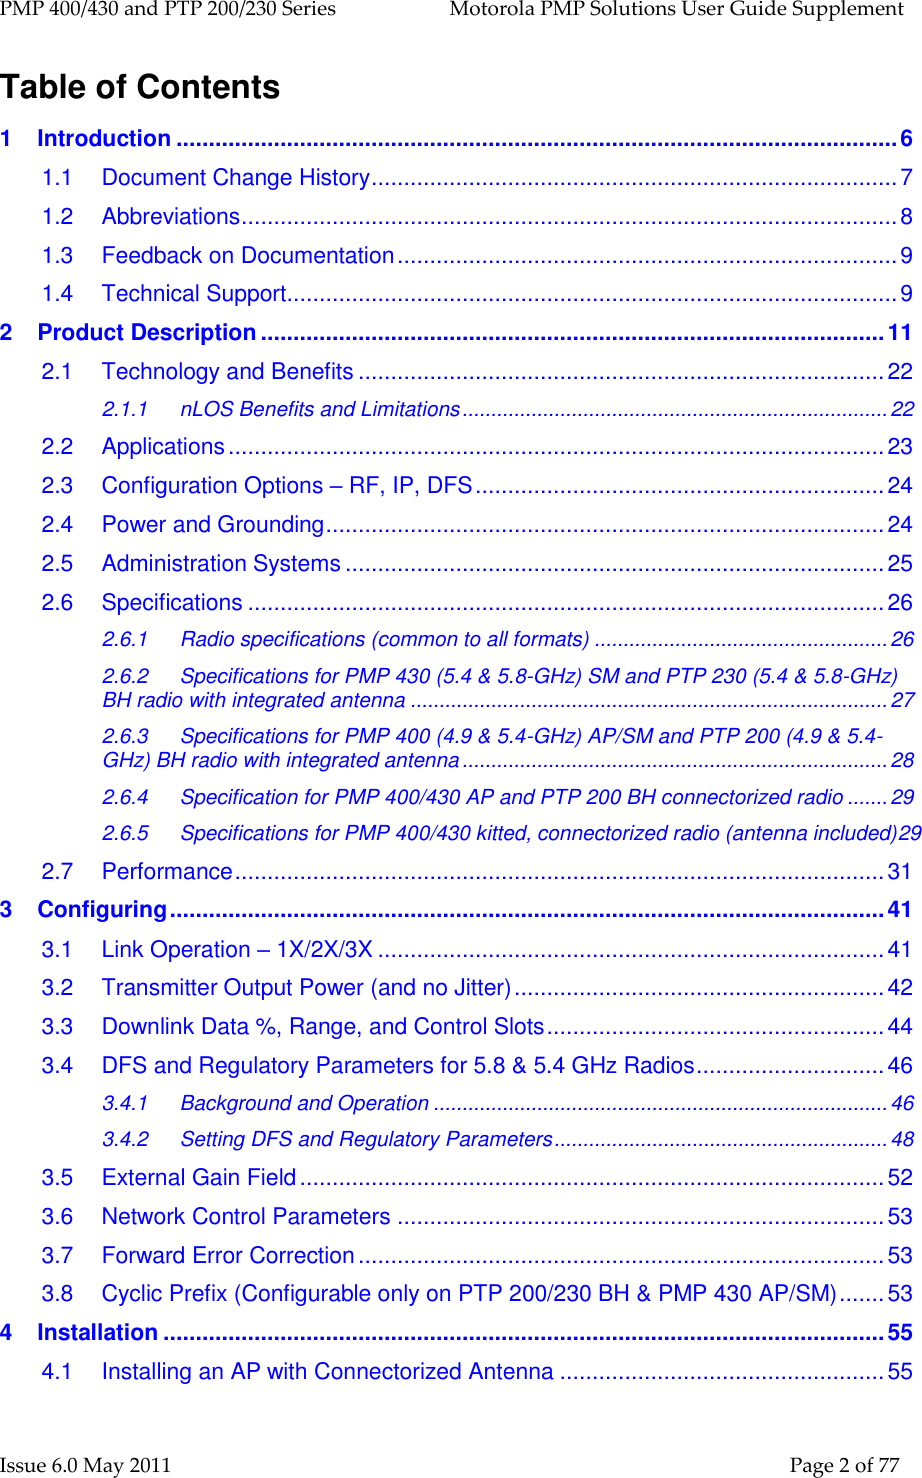 PMP 400/430 and PTP 200/230 Series   Motorola PMP Solutions User Guide Supplement Issue 6.0 May 2011    Page 2 of 77 Table of Contents 1 Introduction ............................................................................................................... 6 1.1 Document Change History ................................................................................. 7 1.2 Abbreviations ..................................................................................................... 8 1.3 Feedback on Documentation ............................................................................. 9 1.4 Technical Support .............................................................................................. 9 2 Product Description ................................................................................................ 11 2.1 Technology and Benefits ................................................................................. 22 2.1.1 nLOS Benefits and Limitations .......................................................................... 22 2.2 Applications ..................................................................................................... 23 2.3 Configuration Options – RF, IP, DFS ............................................................... 24 2.4 Power and Grounding ...................................................................................... 24 2.5 Administration Systems ................................................................................... 25 2.6 Specifications .................................................................................................. 26 2.6.1 Radio specifications (common to all formats) ................................................... 26 2.6.2 Specifications for PMP 430 (5.4 &amp; 5.8-GHz) SM and PTP 230 (5.4 &amp; 5.8-GHz) BH radio with integrated antenna ................................................................................... 27 2.6.3 Specifications for PMP 400 (4.9 &amp; 5.4-GHz) AP/SM and PTP 200 (4.9 &amp; 5.4-GHz) BH radio with integrated antenna .......................................................................... 28 2.6.4 Specification for PMP 400/430 AP and PTP 200 BH connectorized radio ....... 29 2.6.5 Specifications for PMP 400/430 kitted, connectorized radio (antenna included)29 2.7 Performance .................................................................................................... 31 3 Configuring .............................................................................................................. 41 3.1 Link Operation – 1X/2X/3X .............................................................................. 41 3.2 Transmitter Output Power (and no Jitter) ......................................................... 42 3.3 Downlink Data %, Range, and Control Slots .................................................... 44 3.4 DFS and Regulatory Parameters for 5.8 &amp; 5.4 GHz Radios ............................. 46 3.4.1 Background and Operation ............................................................................... 46 3.4.2 Setting DFS and Regulatory Parameters .......................................................... 48 3.5 External Gain Field .......................................................................................... 52 3.6 Network Control Parameters ........................................................................... 53 3.7 Forward Error Correction ................................................................................. 53 3.8 Cyclic Prefix (Configurable only on PTP 200/230 BH &amp; PMP 430 AP/SM) ....... 53 4 Installation ............................................................................................................... 55 4.1 Installing an AP with Connectorized Antenna .................................................. 55 